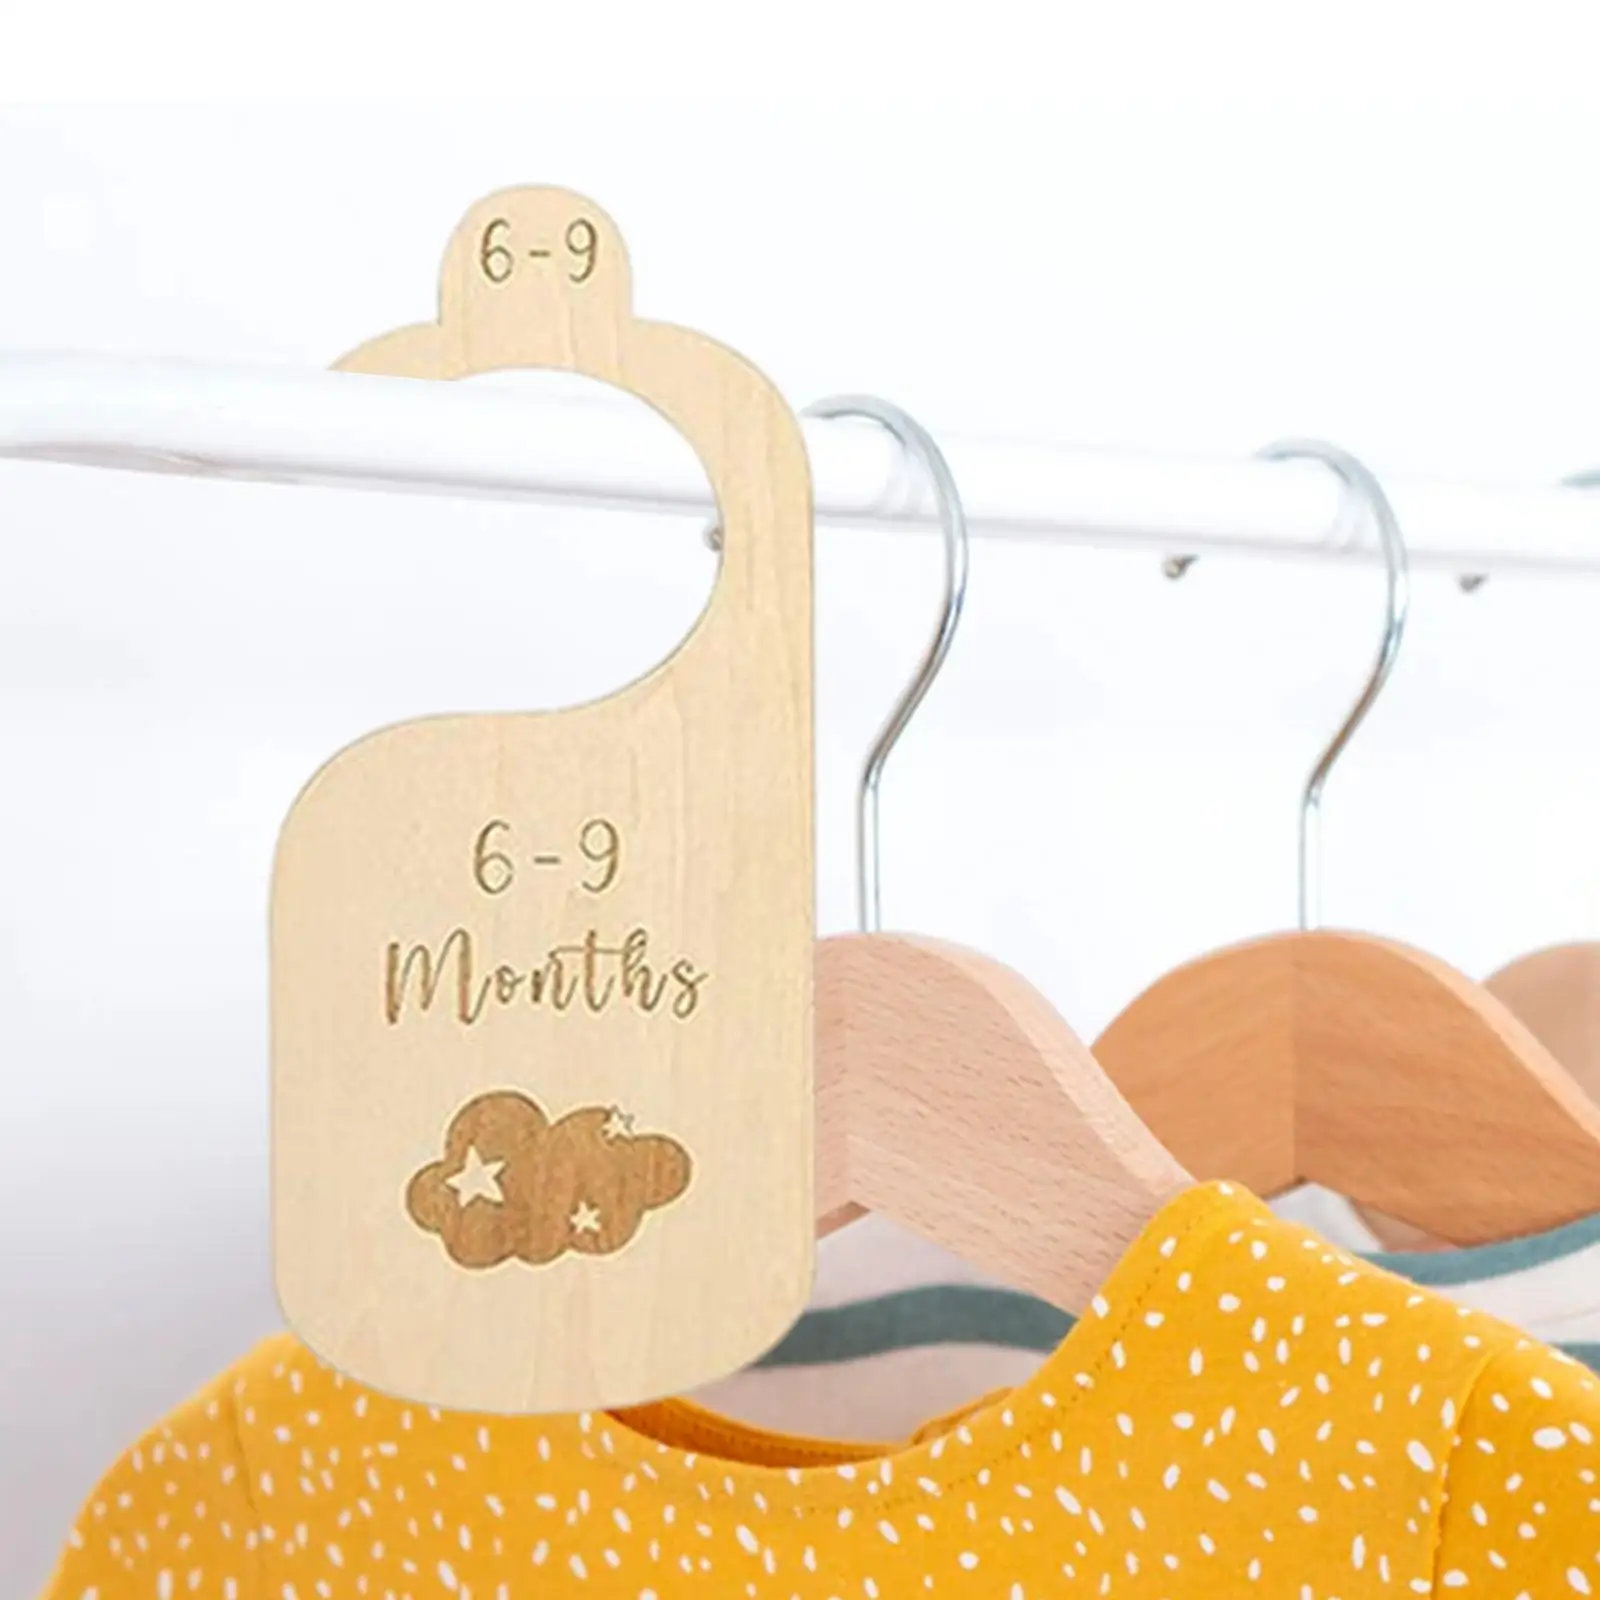 7x Baby Closet Dividers Nursery Clothes Organizers Infant Wardrobe Divider Label Hanging Clothes Dividers New Mom Gift